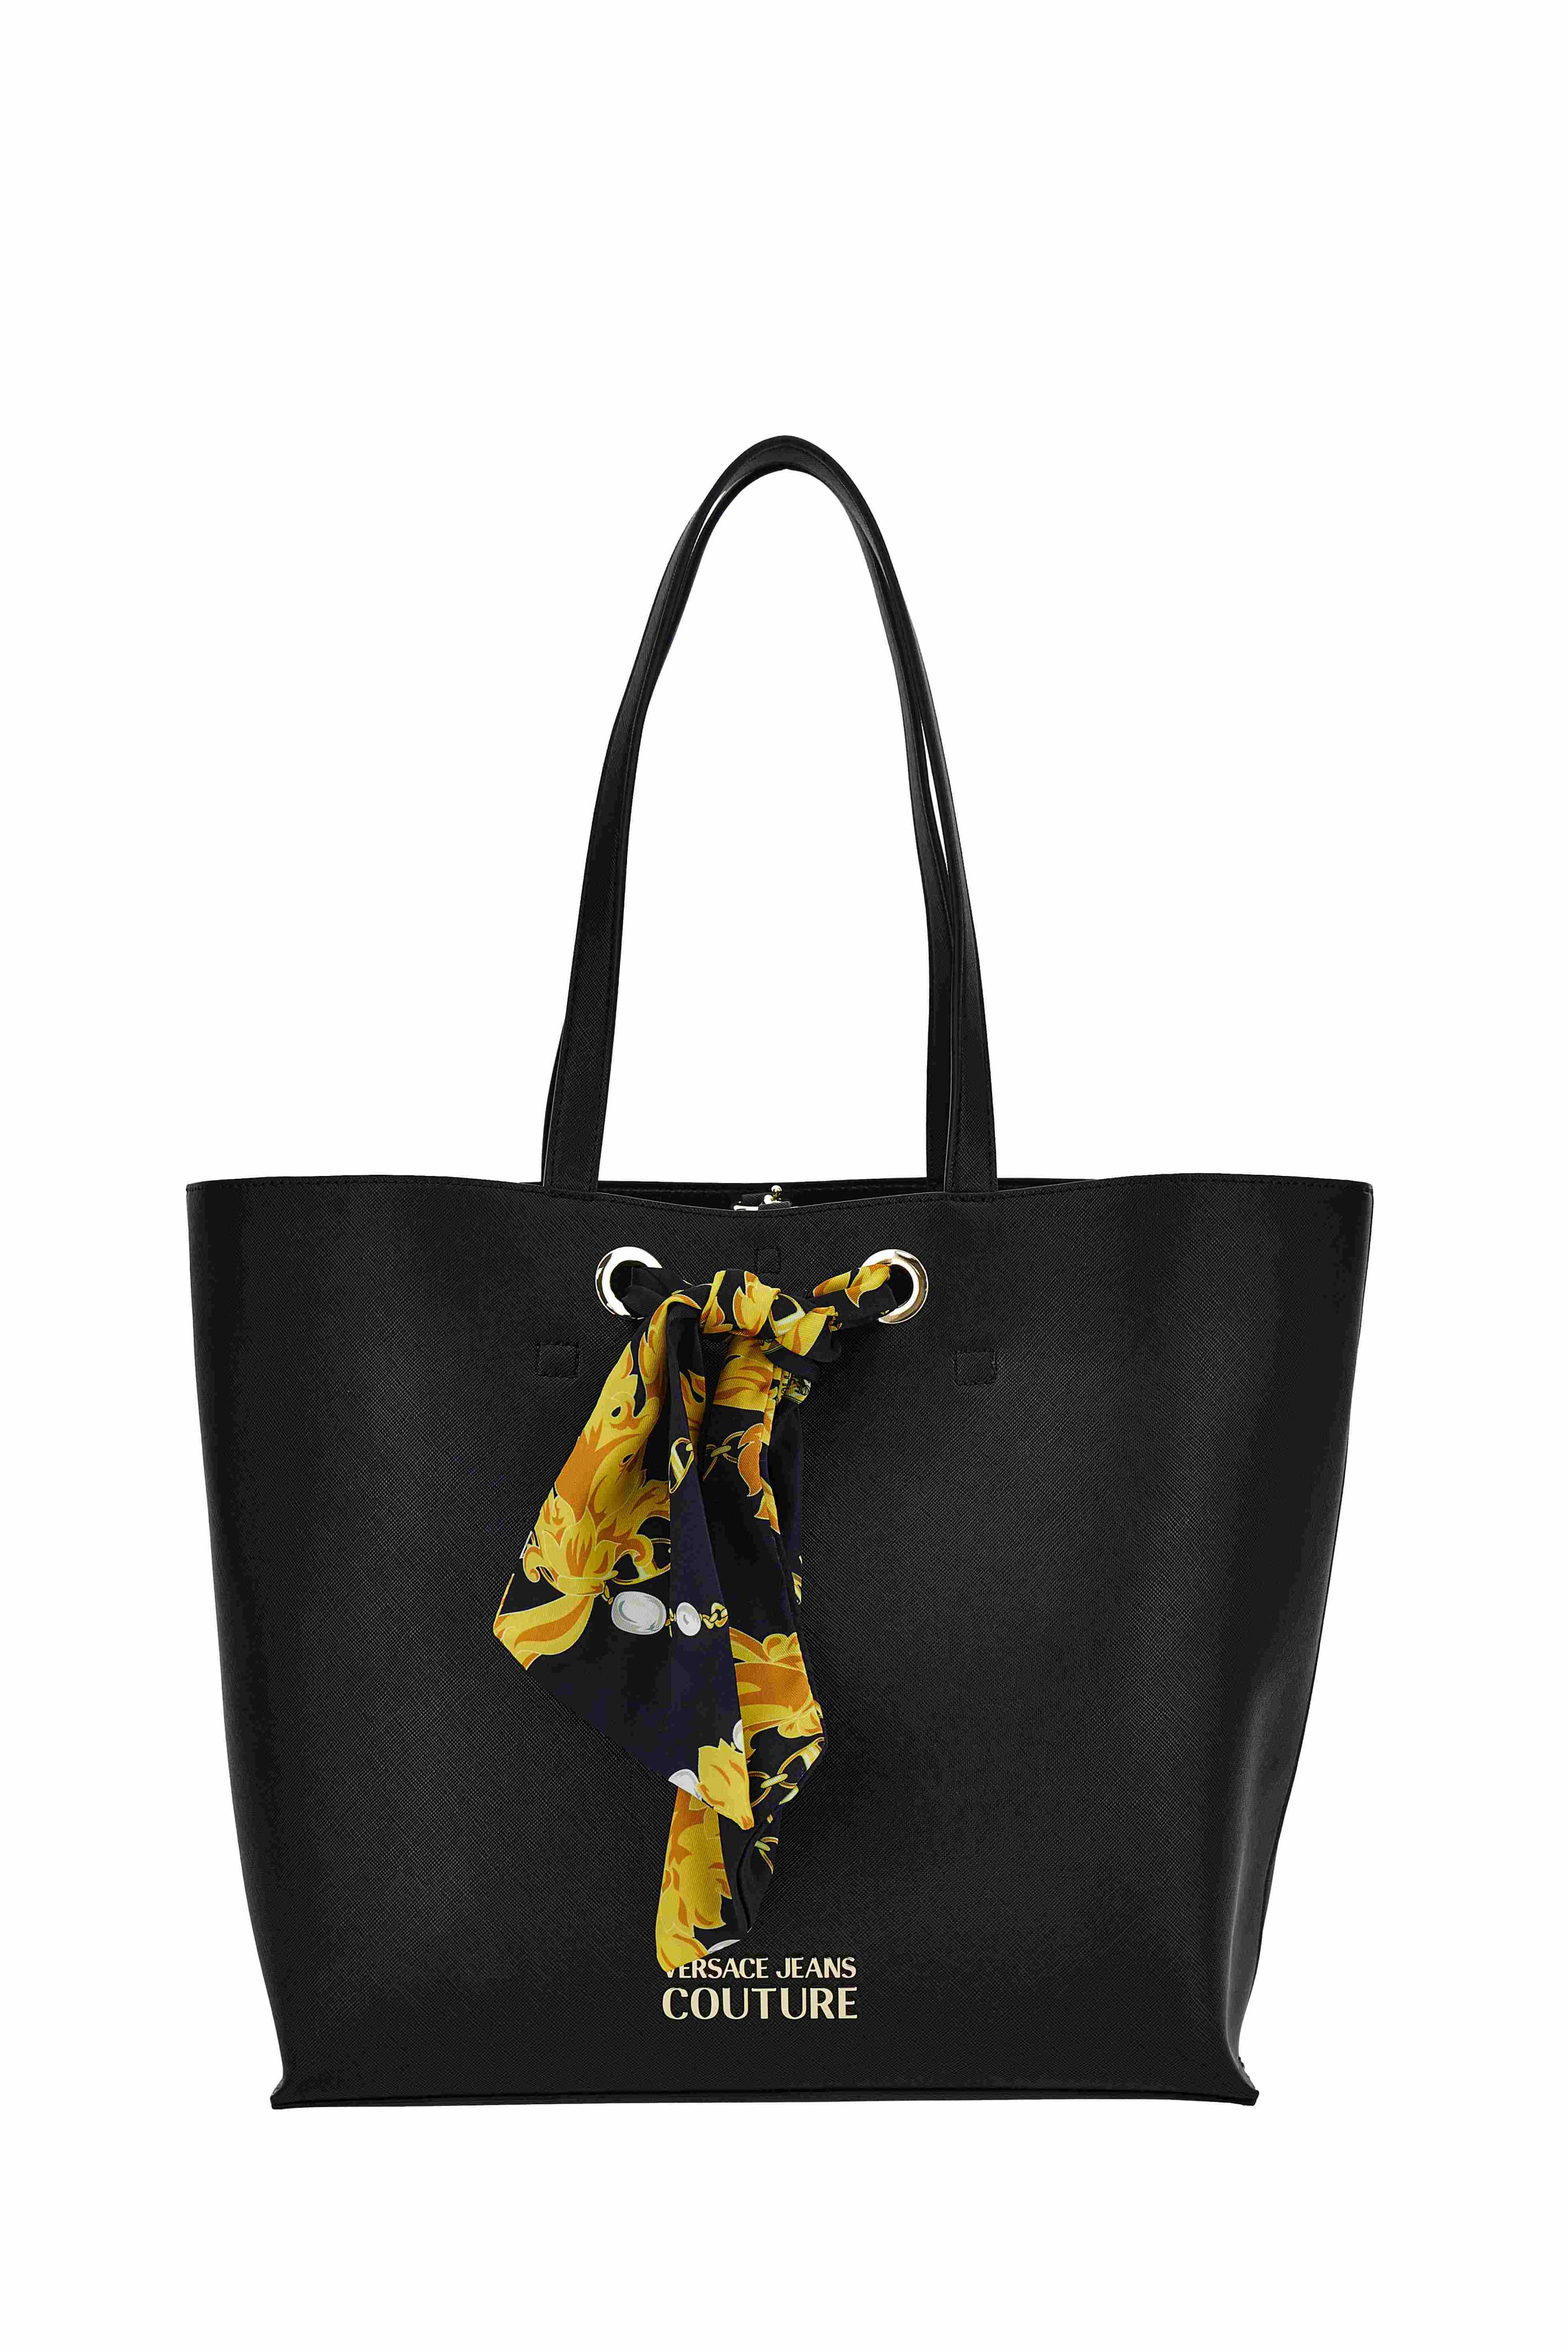 Versace Jeans Couture Thelma Classic Tote Bag With Scarf in Black